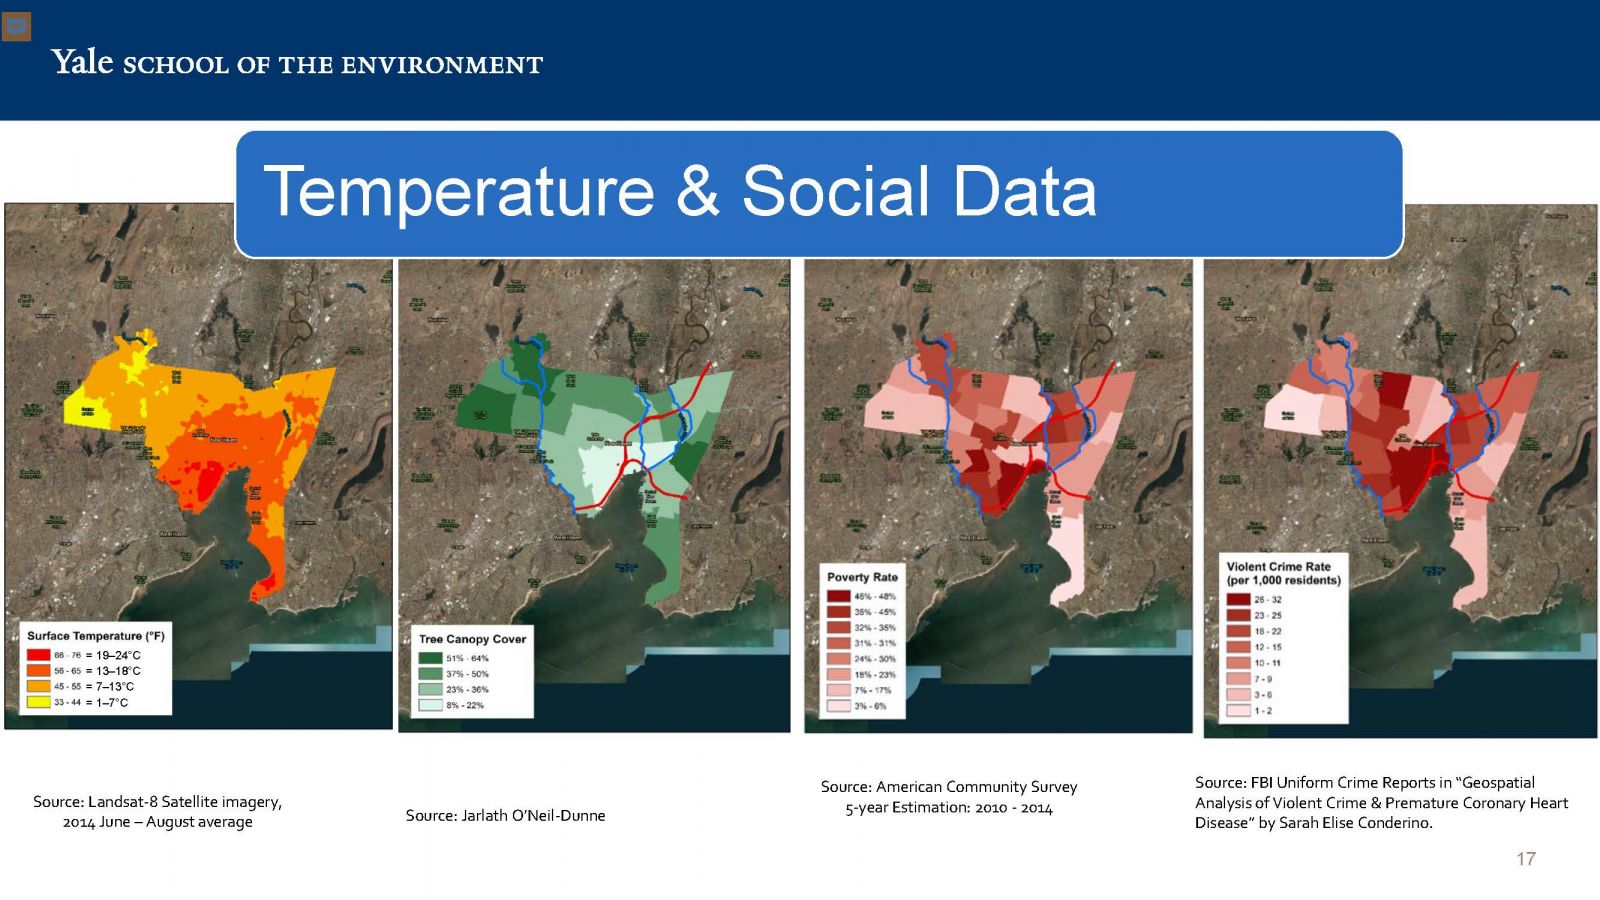 An image of data maps from New Haven, CT that show surface temperature, tree canopy cover, poverty rate, and violent crime rate.